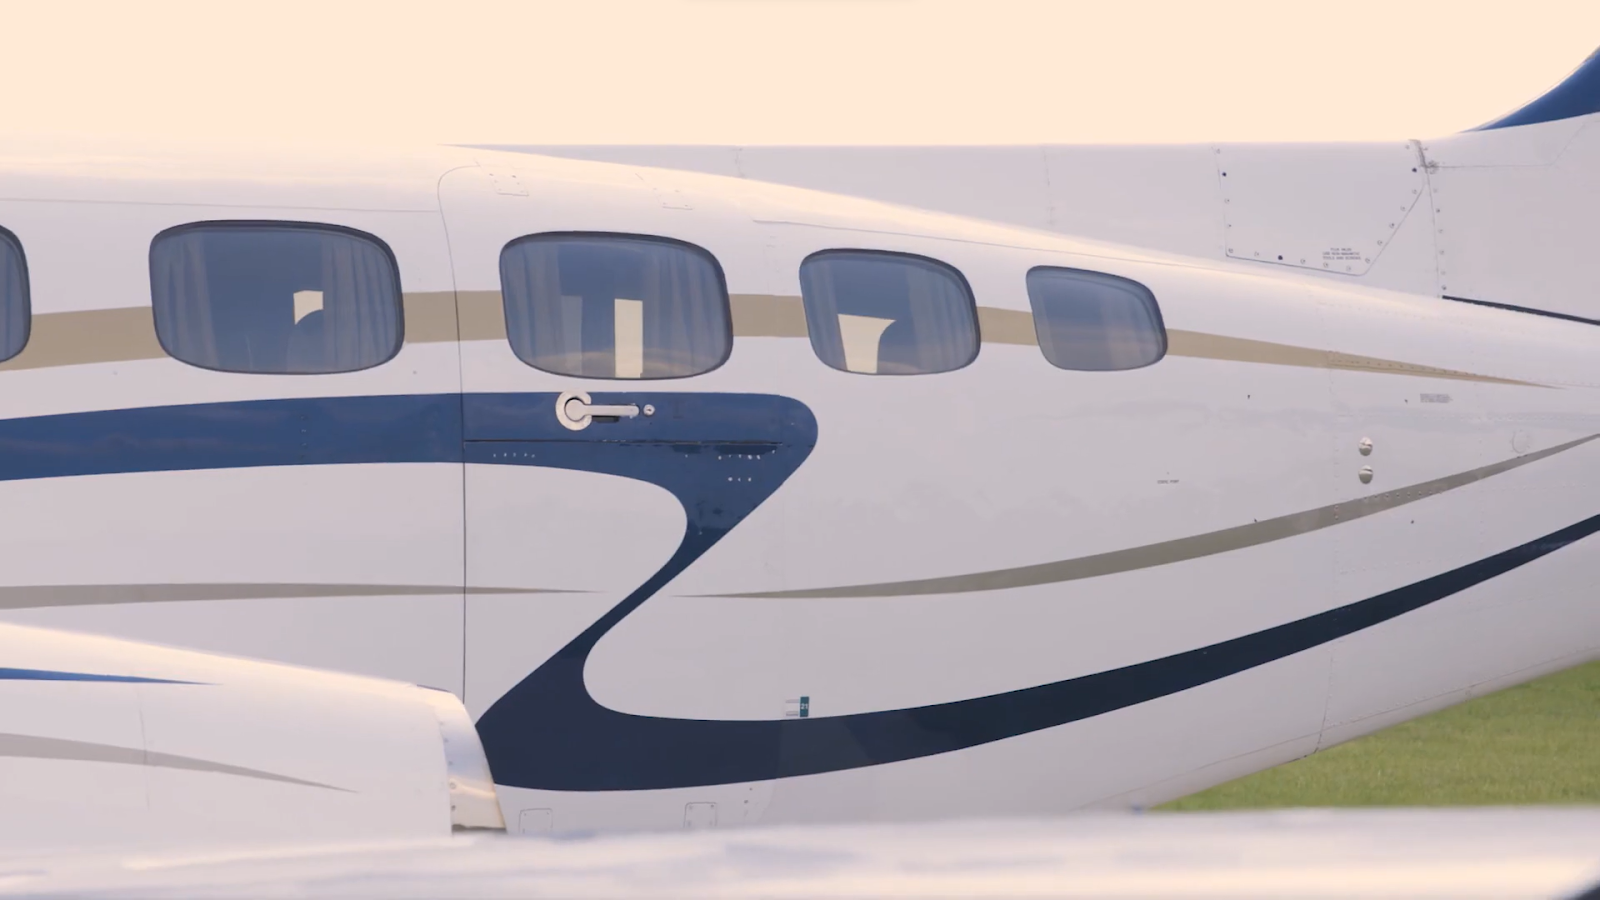 the side of cessna 441